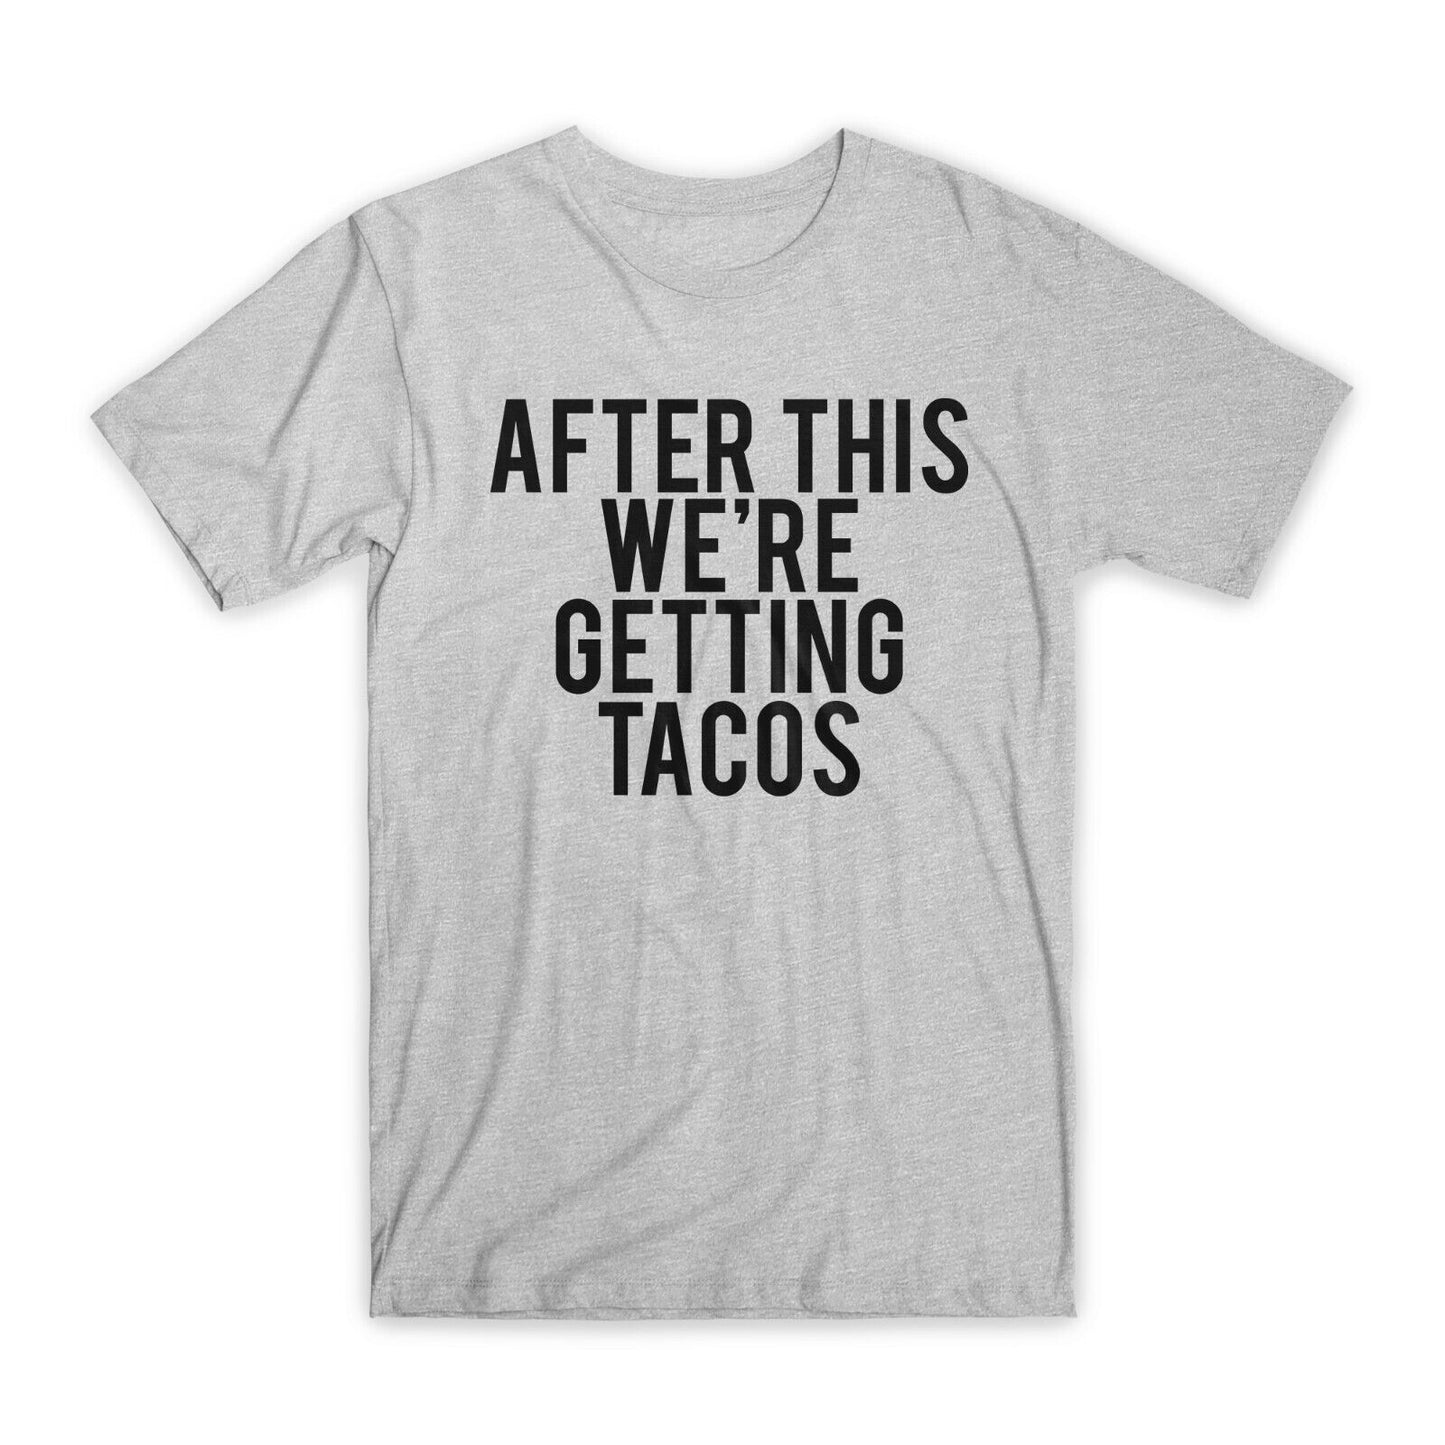 After This We're Getting Tacos T-Shirt Premium Soft Cotton Funny Tees Gift NEW